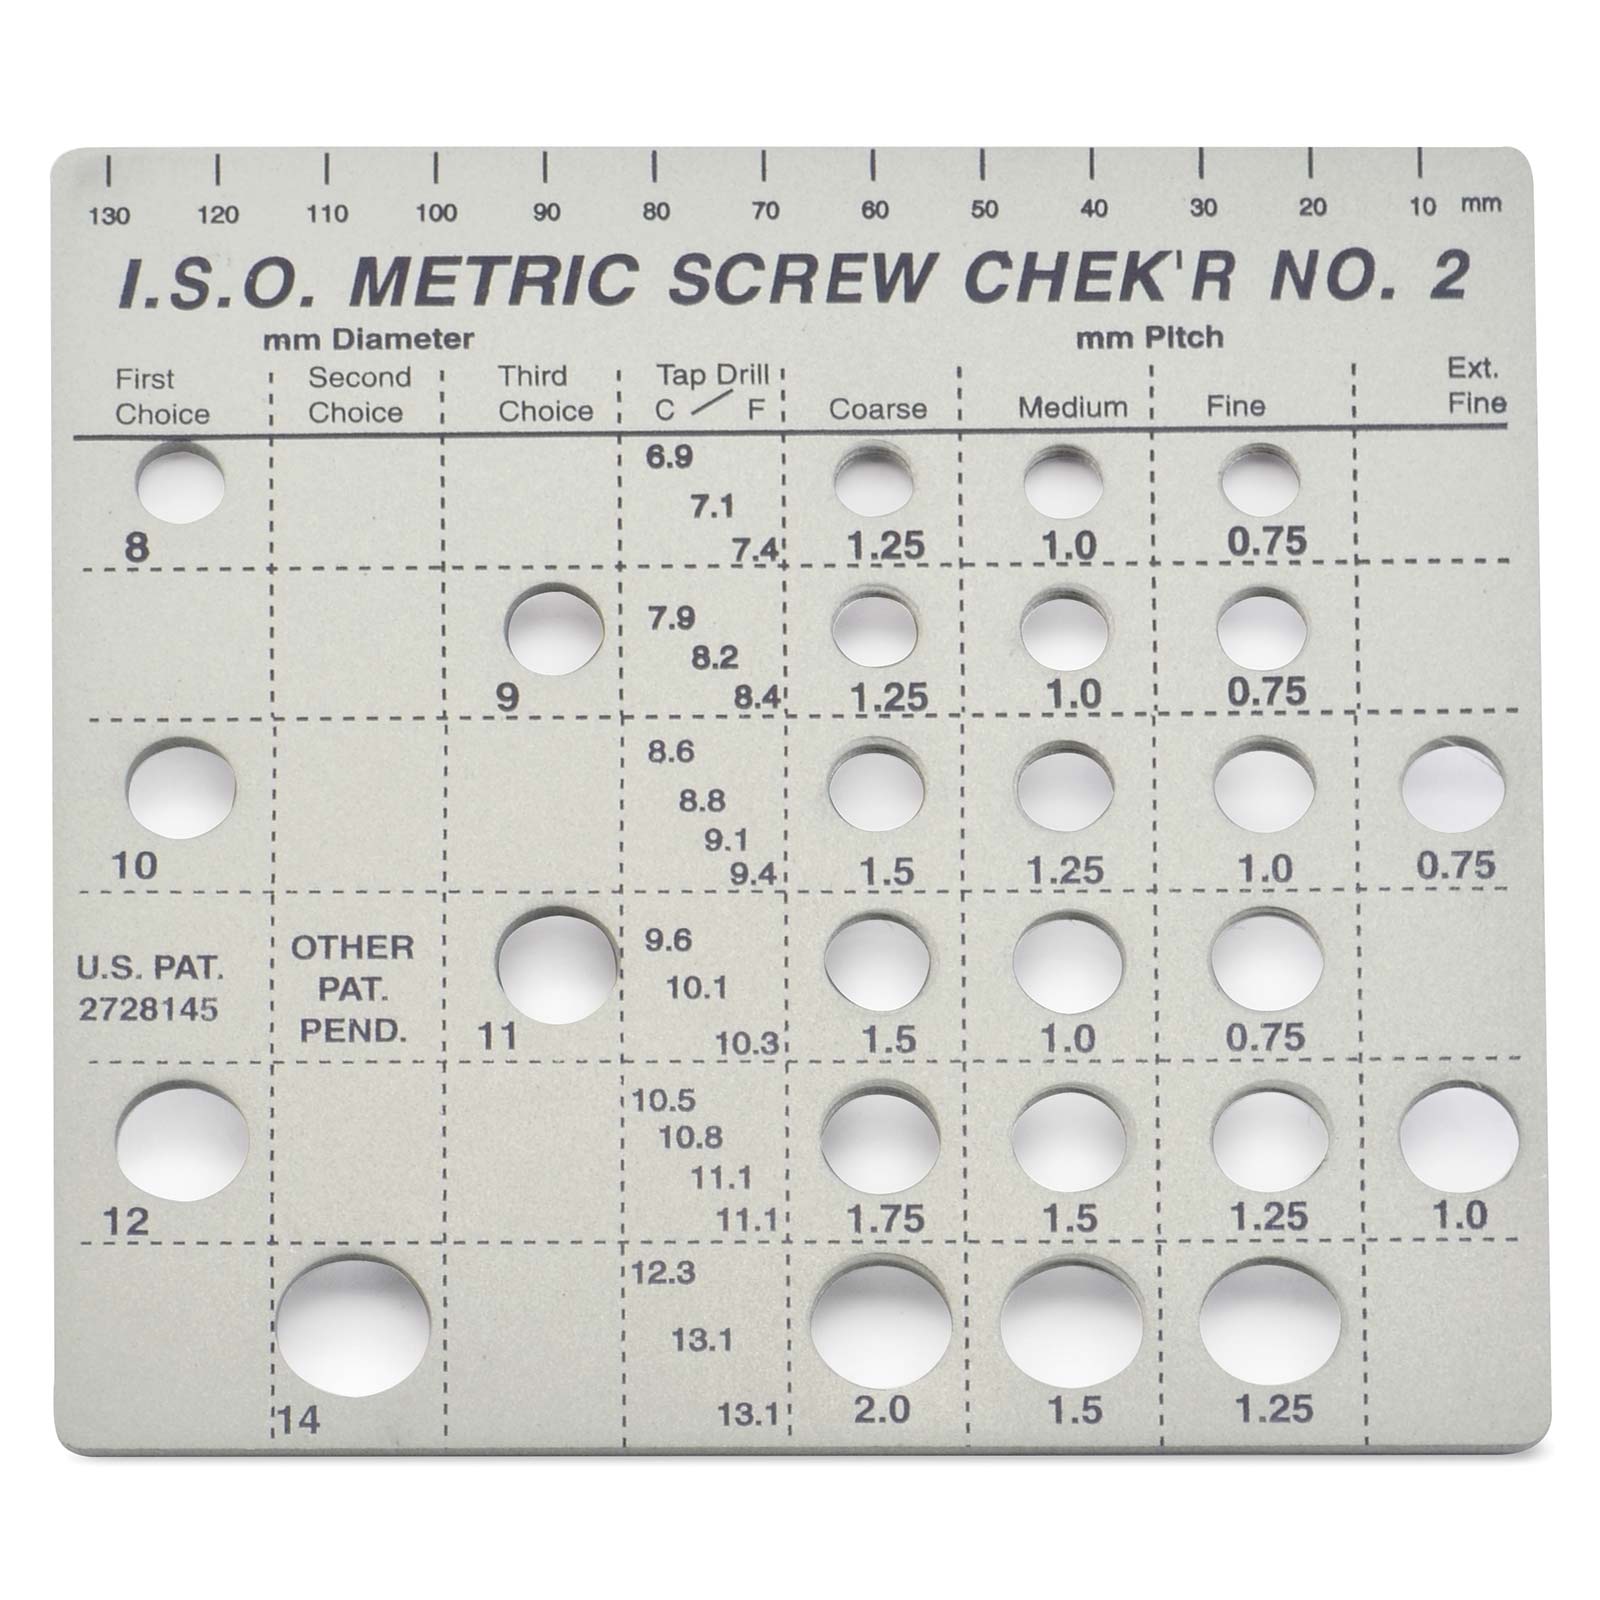 Metric Screw Chek'r for 8 mm to 14 mm in I.S.O. Pitches